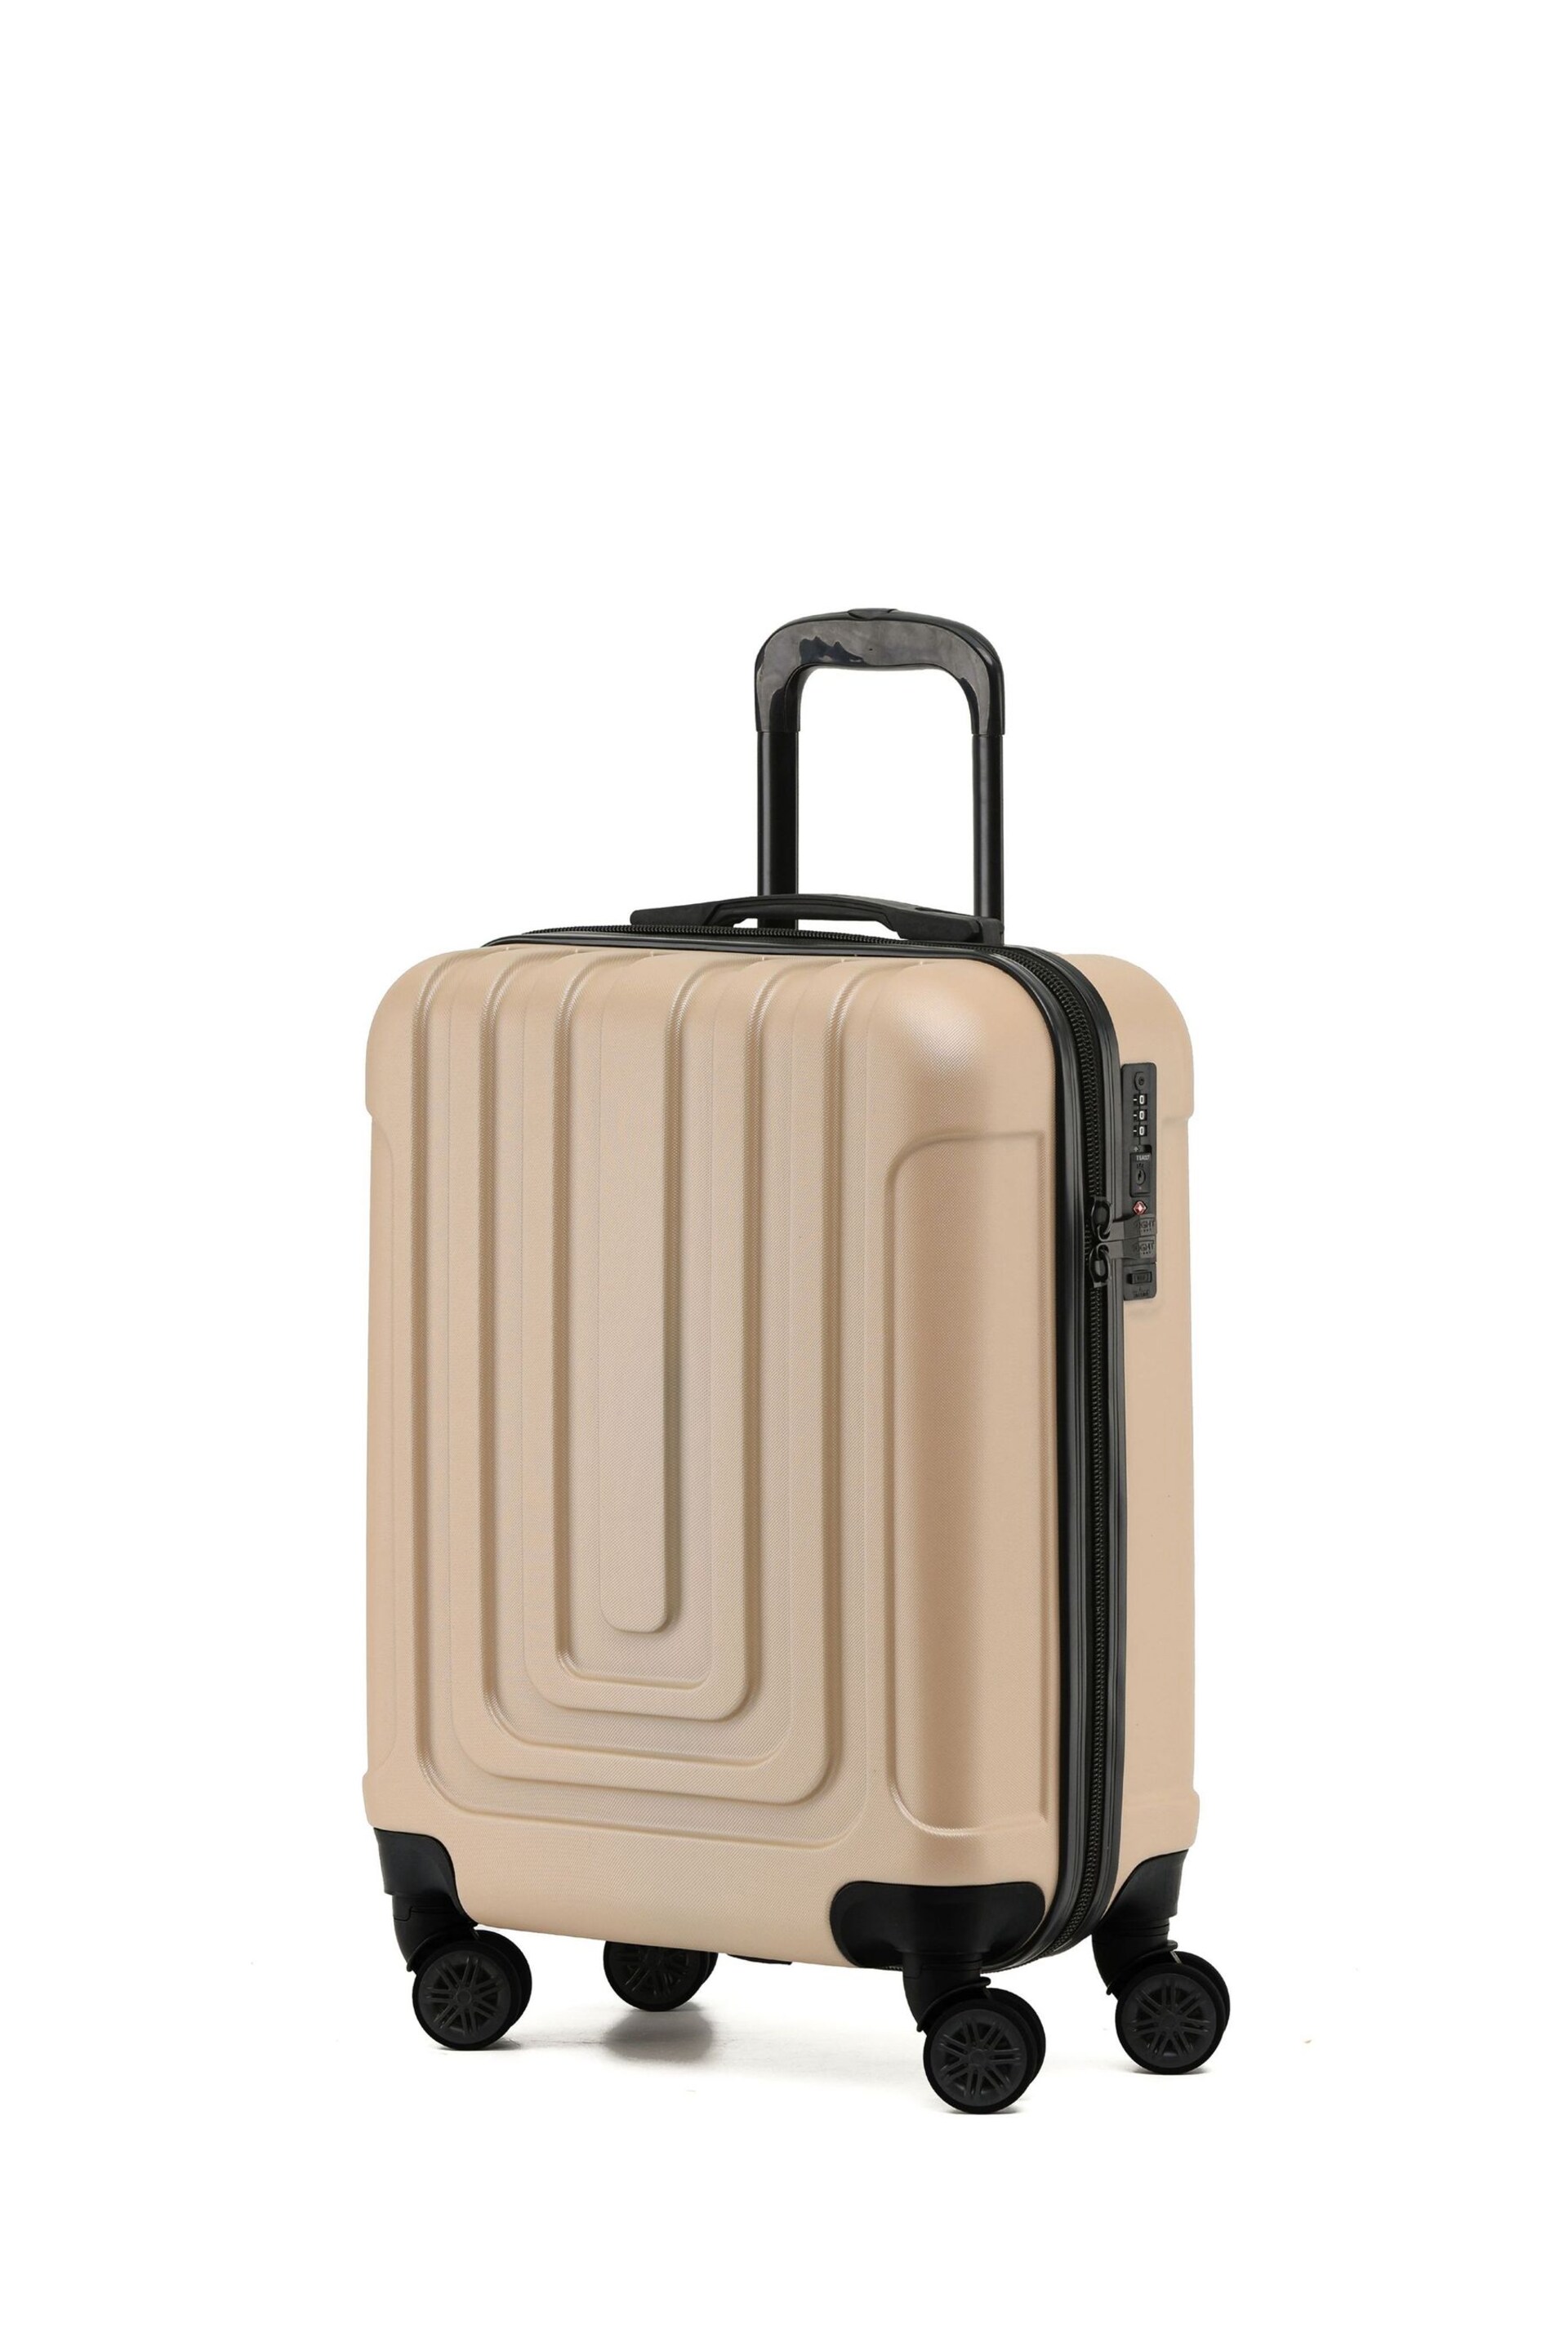 Flight Knight 55x40x20cm Ryanair Priority 8 Wheel ABS Hard Case Cabin Carry On Hand Black Luggage - Image 1 of 7